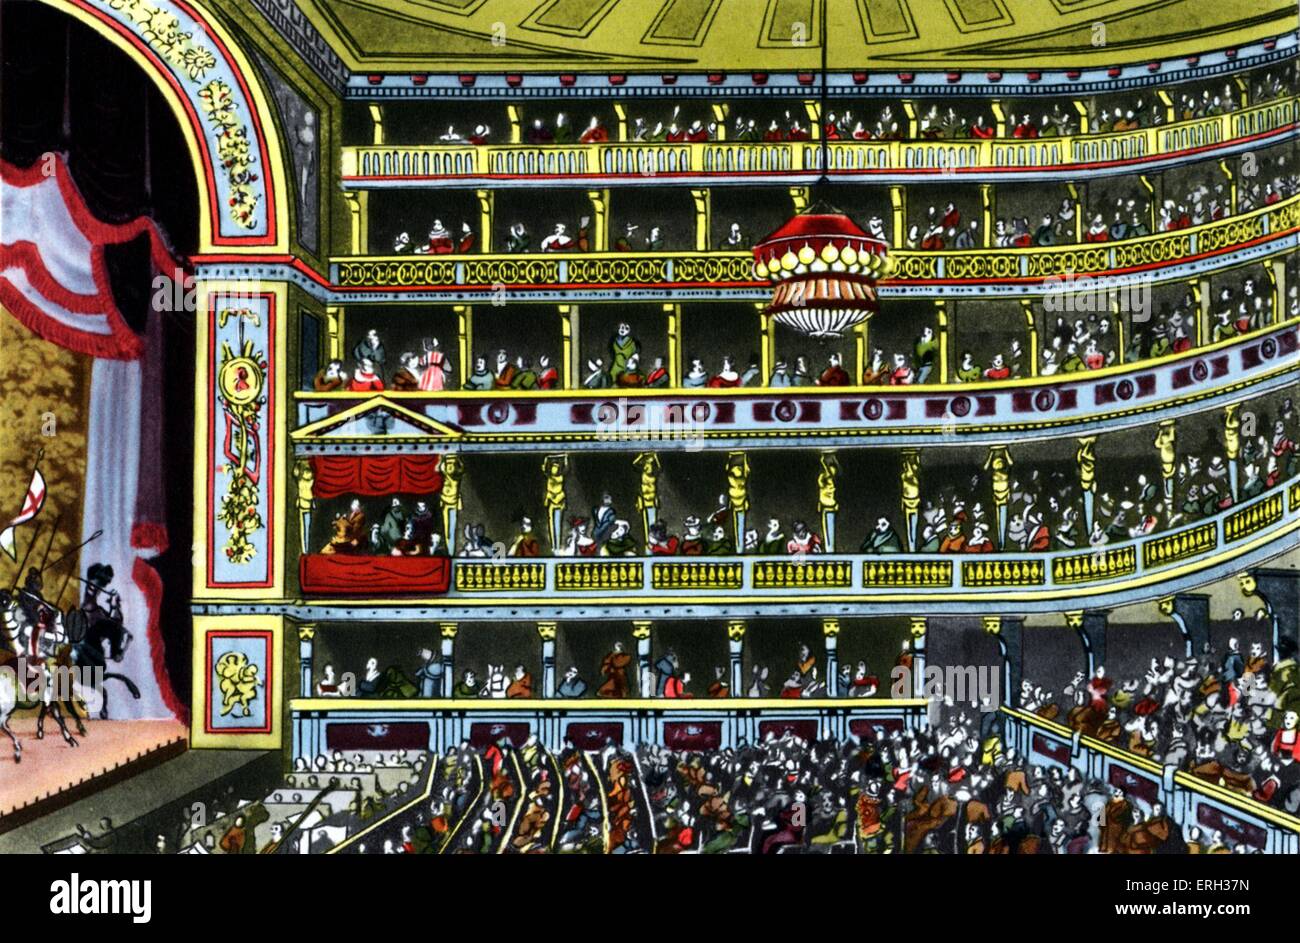 Interior of Theater an der Wien, Vienna. Beethoven's Fidelio premiered here in 1805. Ludwig van Beethoven. Stock Photo